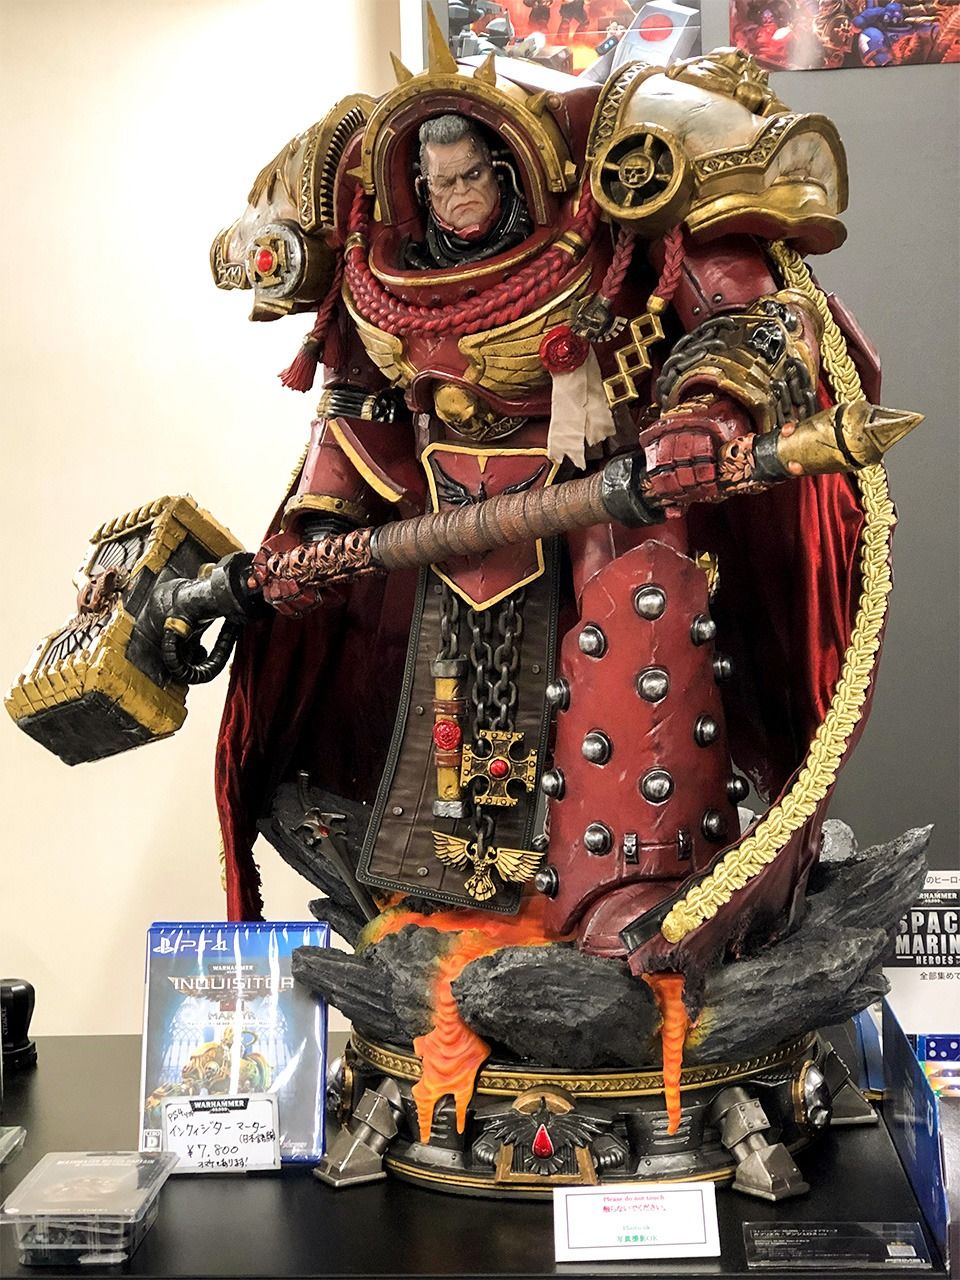 Games Workshop: Building a Hobby Empire in Japan One Figure at a Time